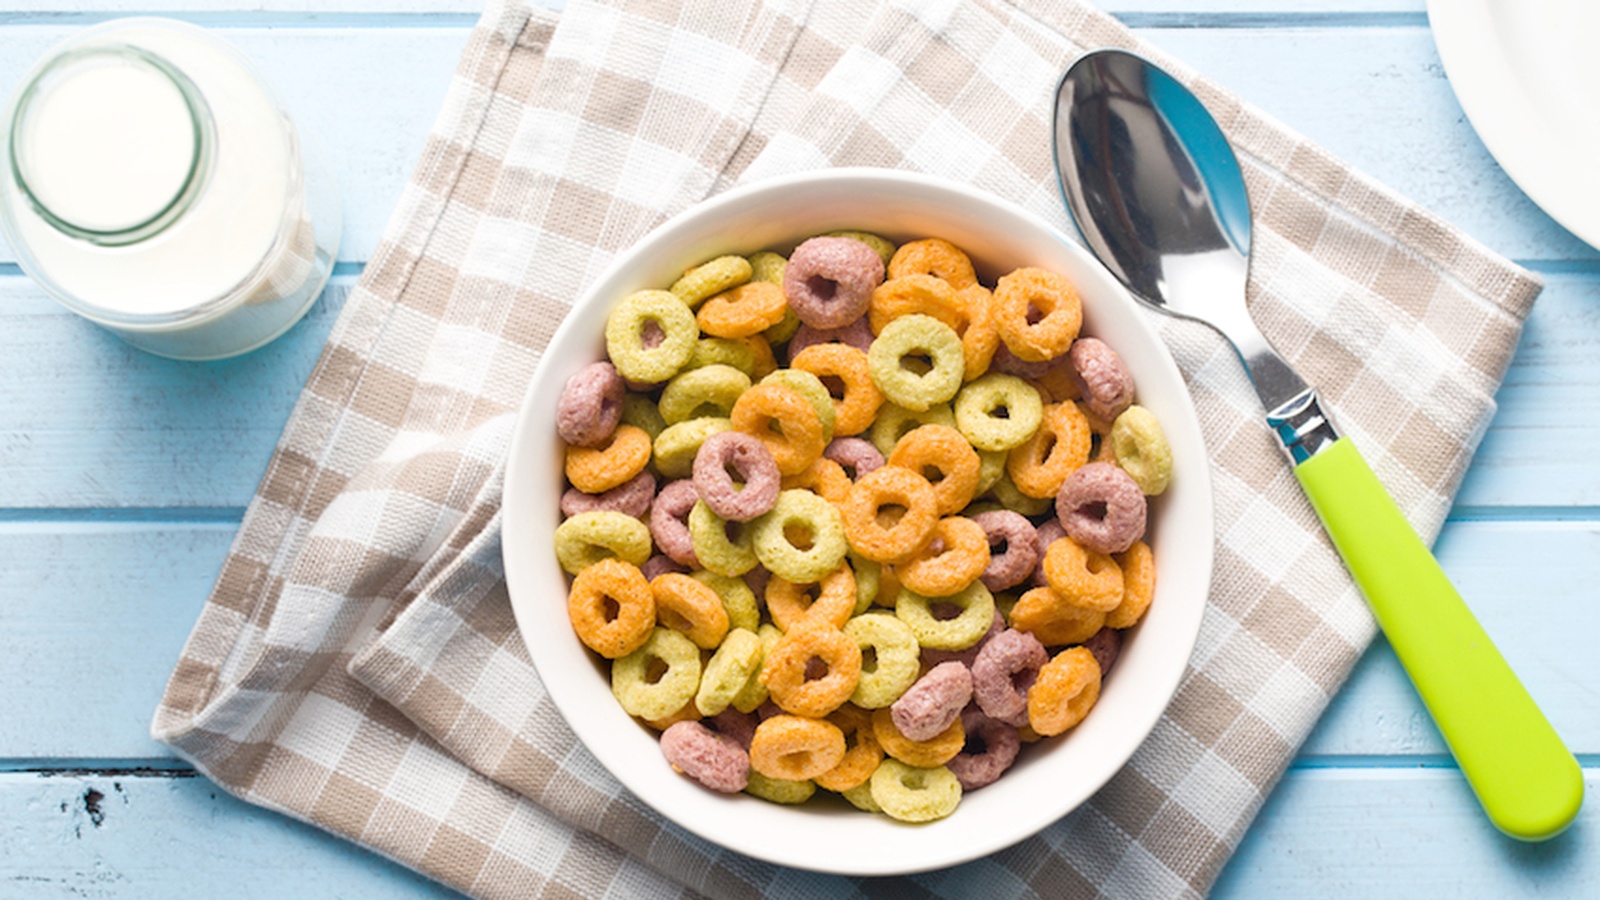 How Much Sugar Is Hiding In Your Favorite Cereals?